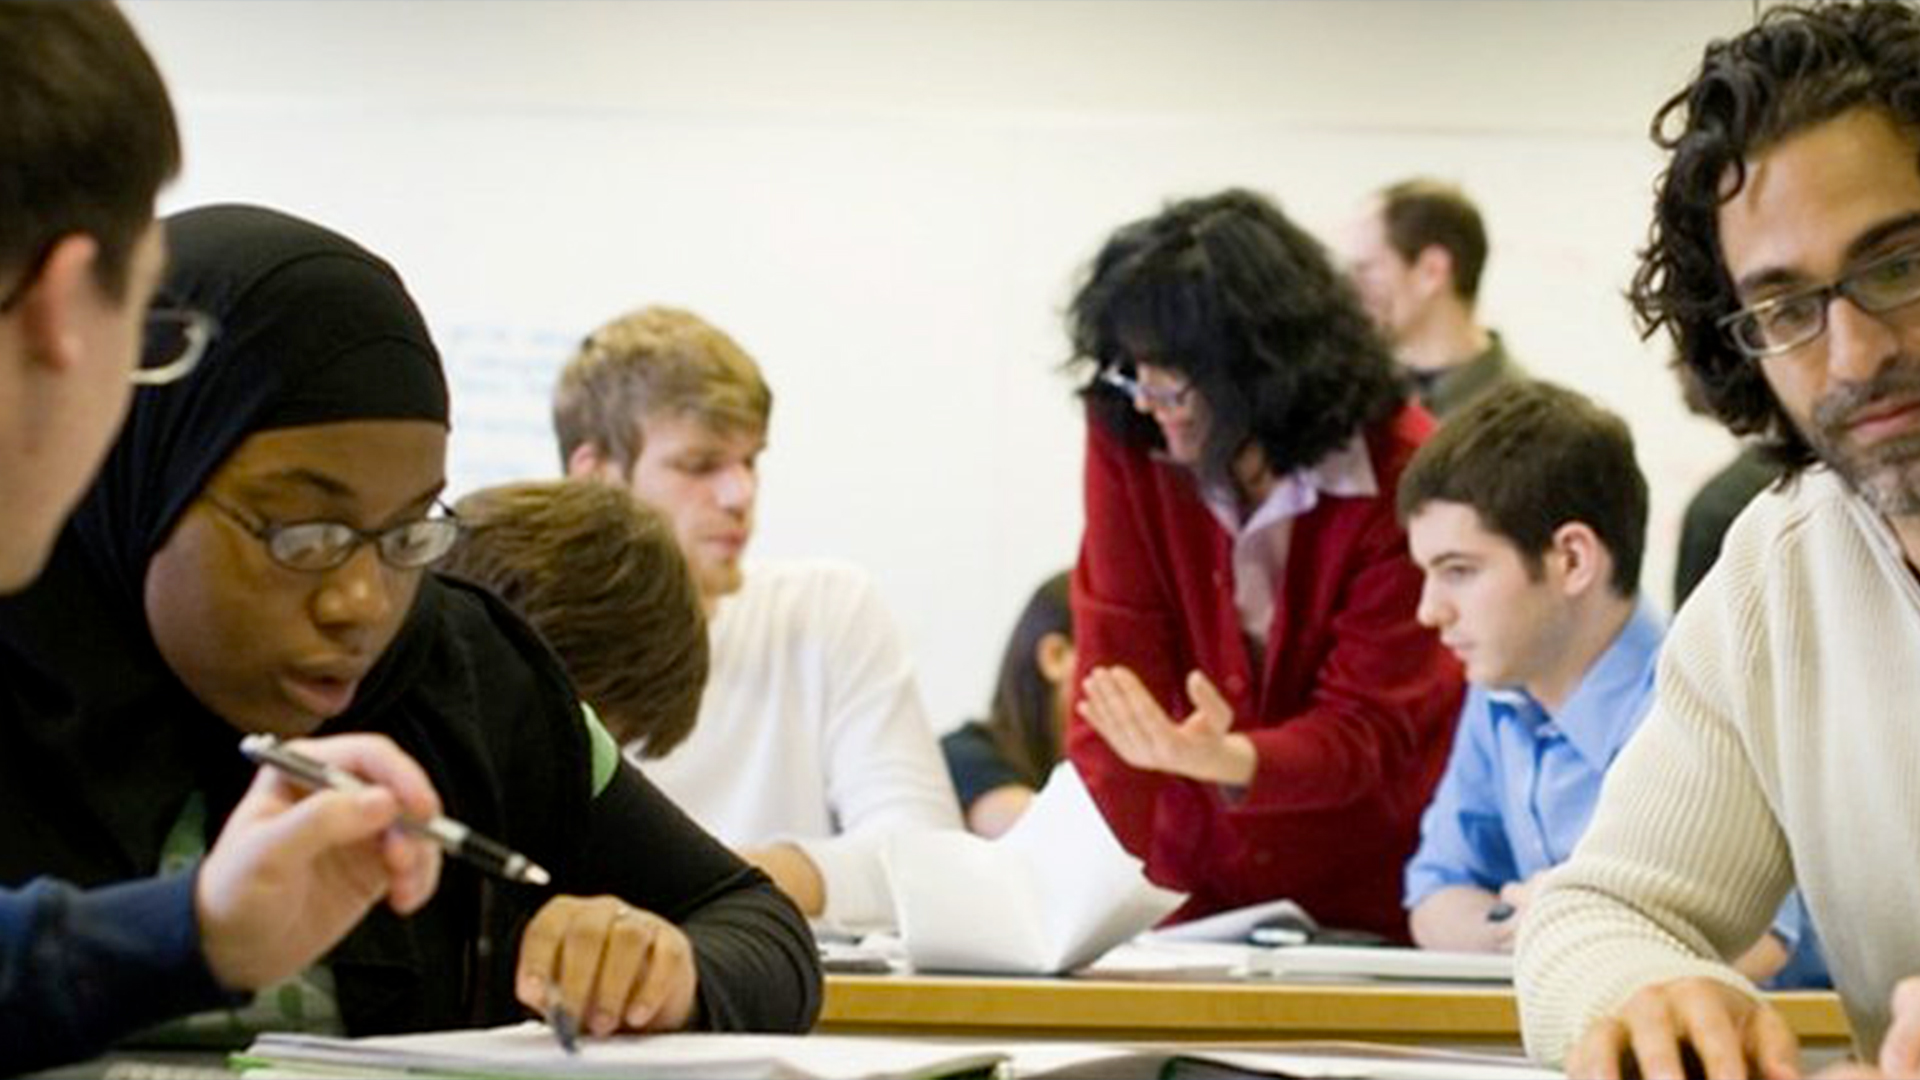 Diverse students sitting at a table working on an assignment.